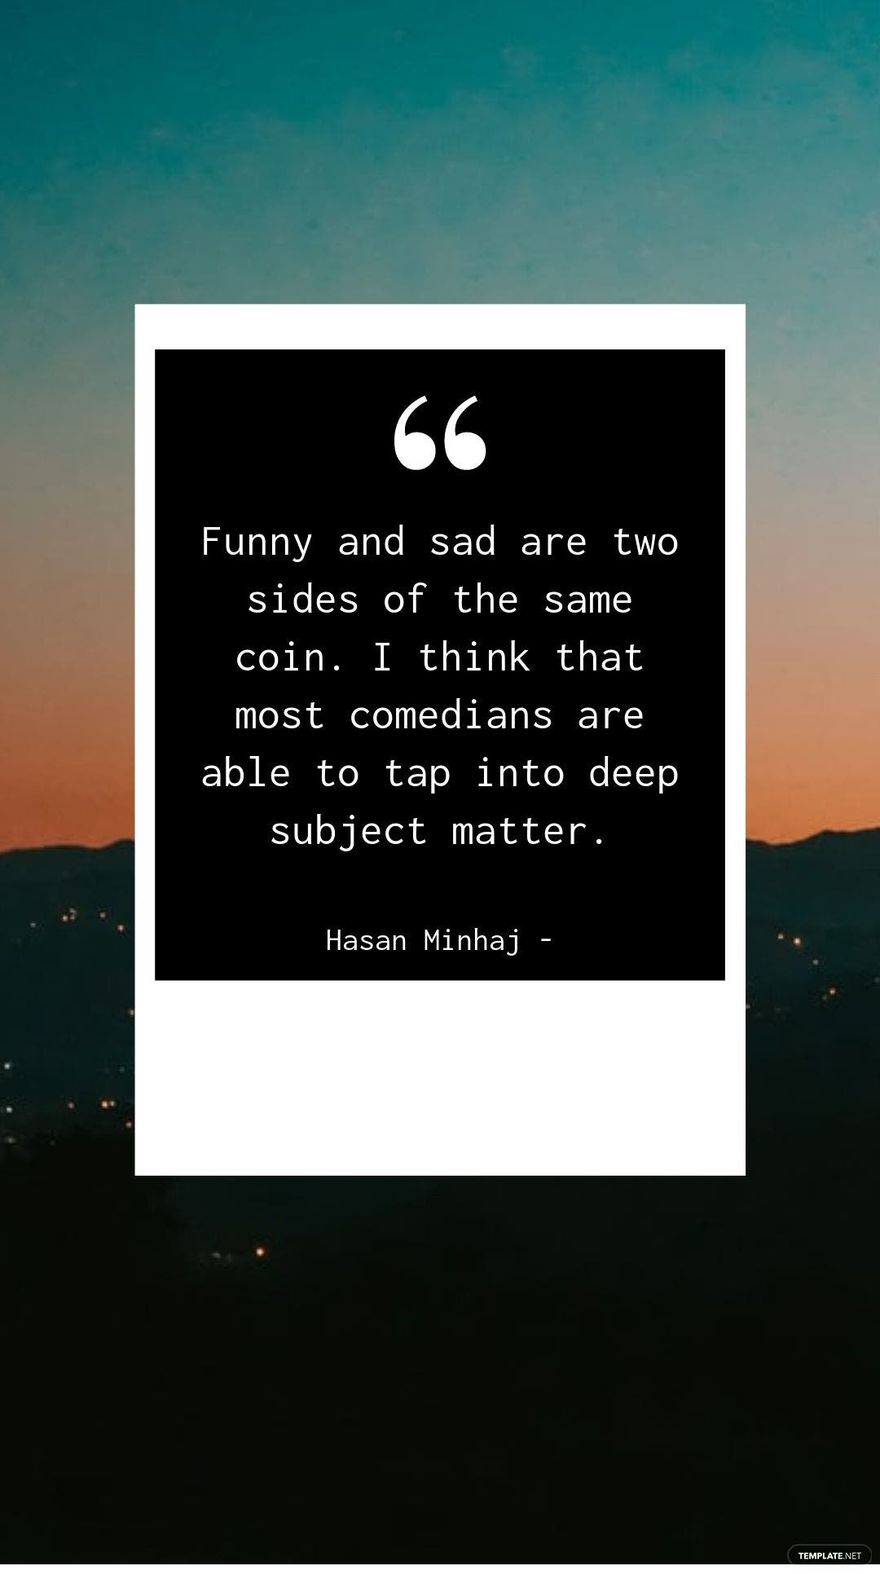 Hasan Minhaj - Funny and sad are two sides of the same coin. I think that most comedians are able to tap into deep subject matter.